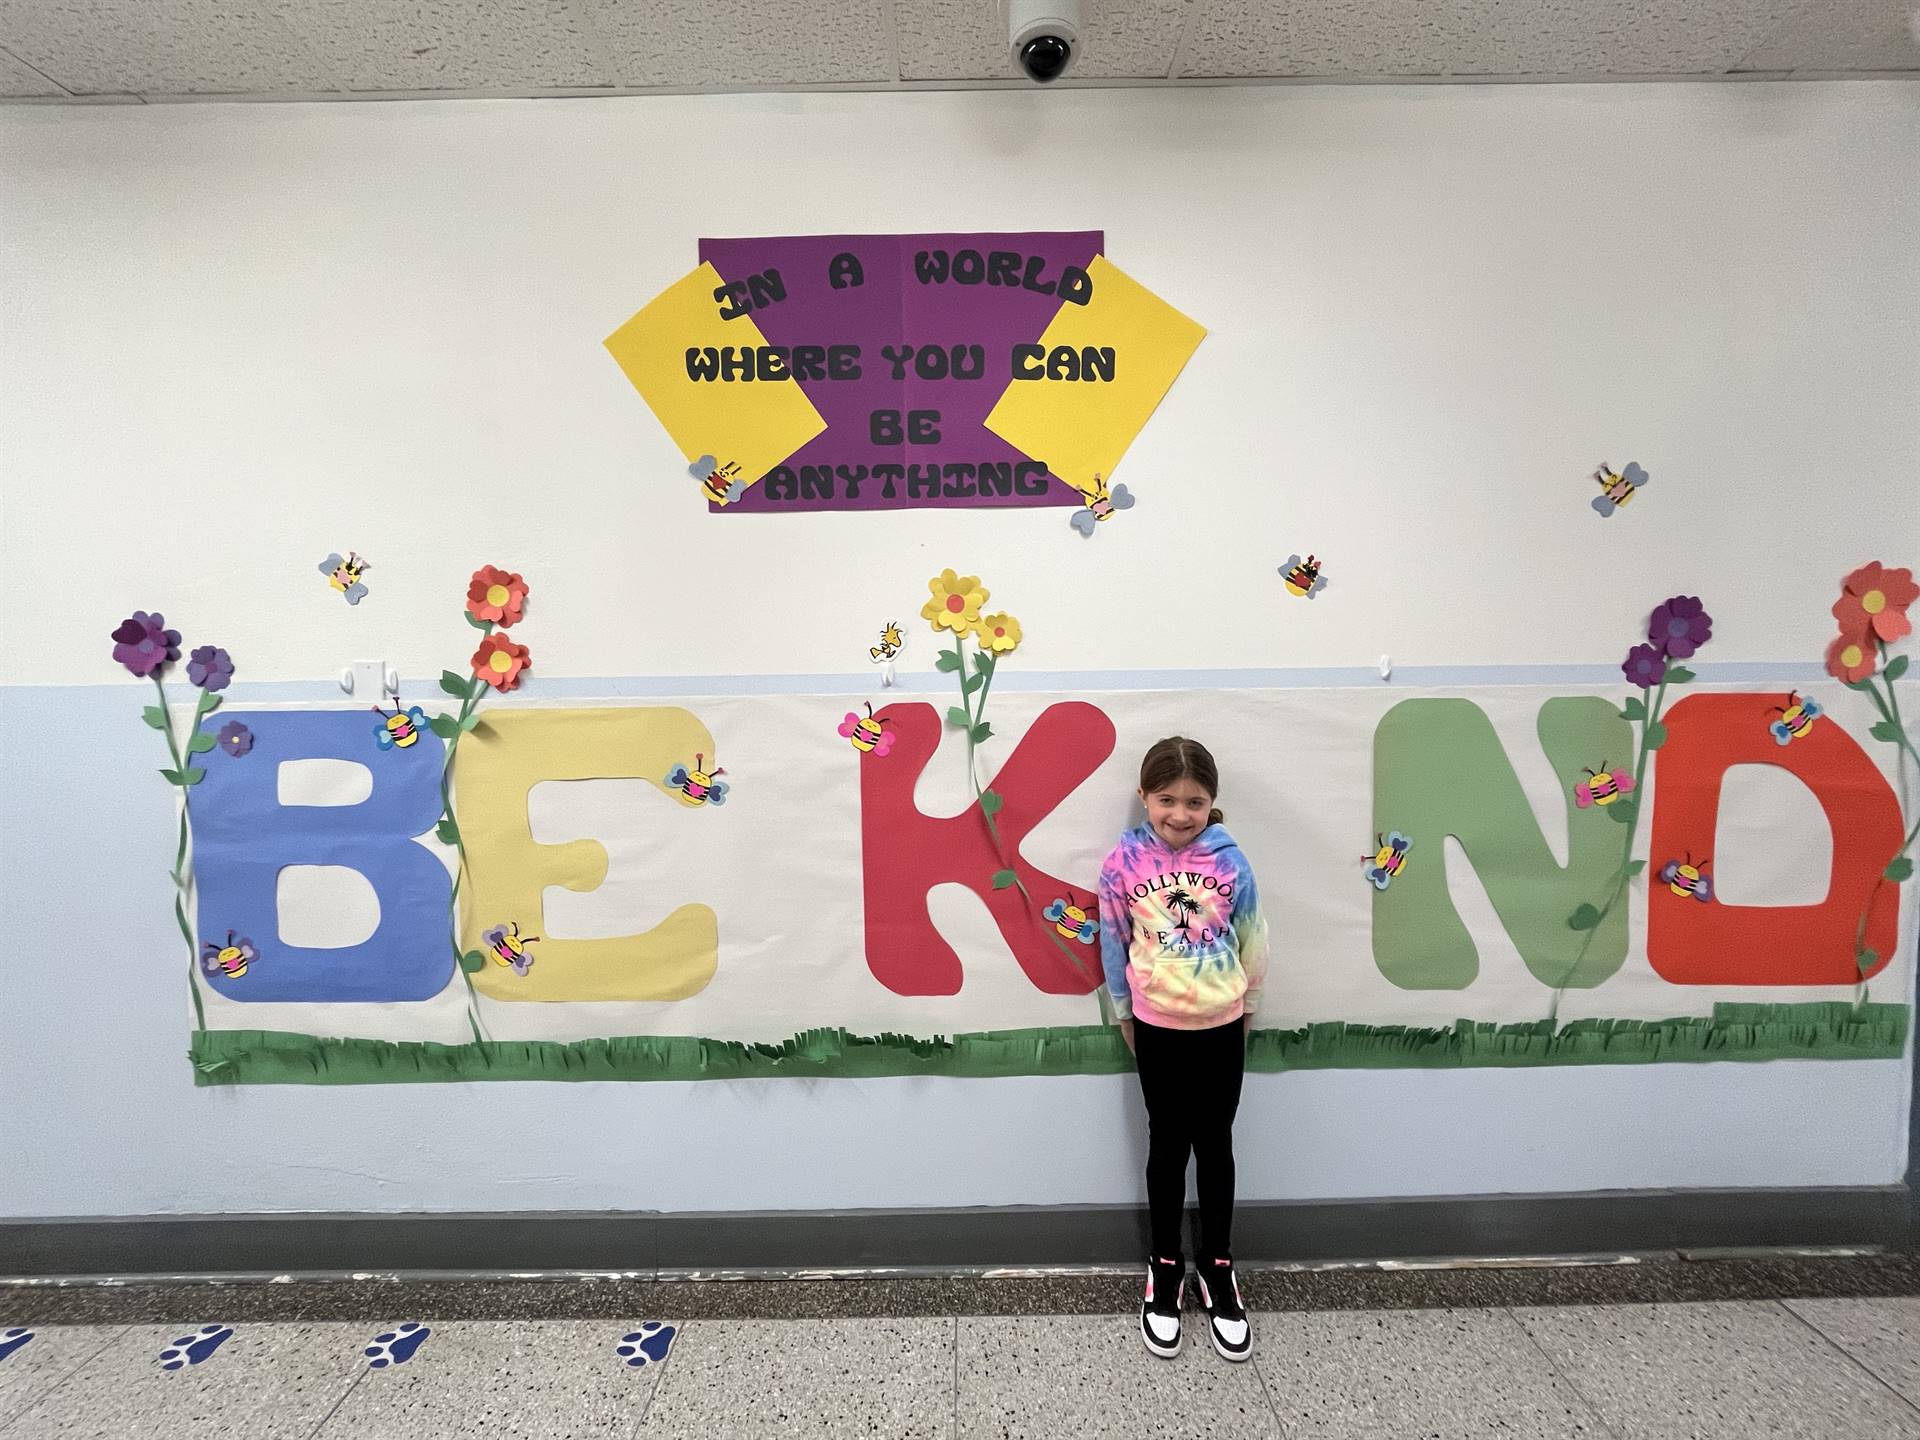 student is "I" in BE KIND poster on wall